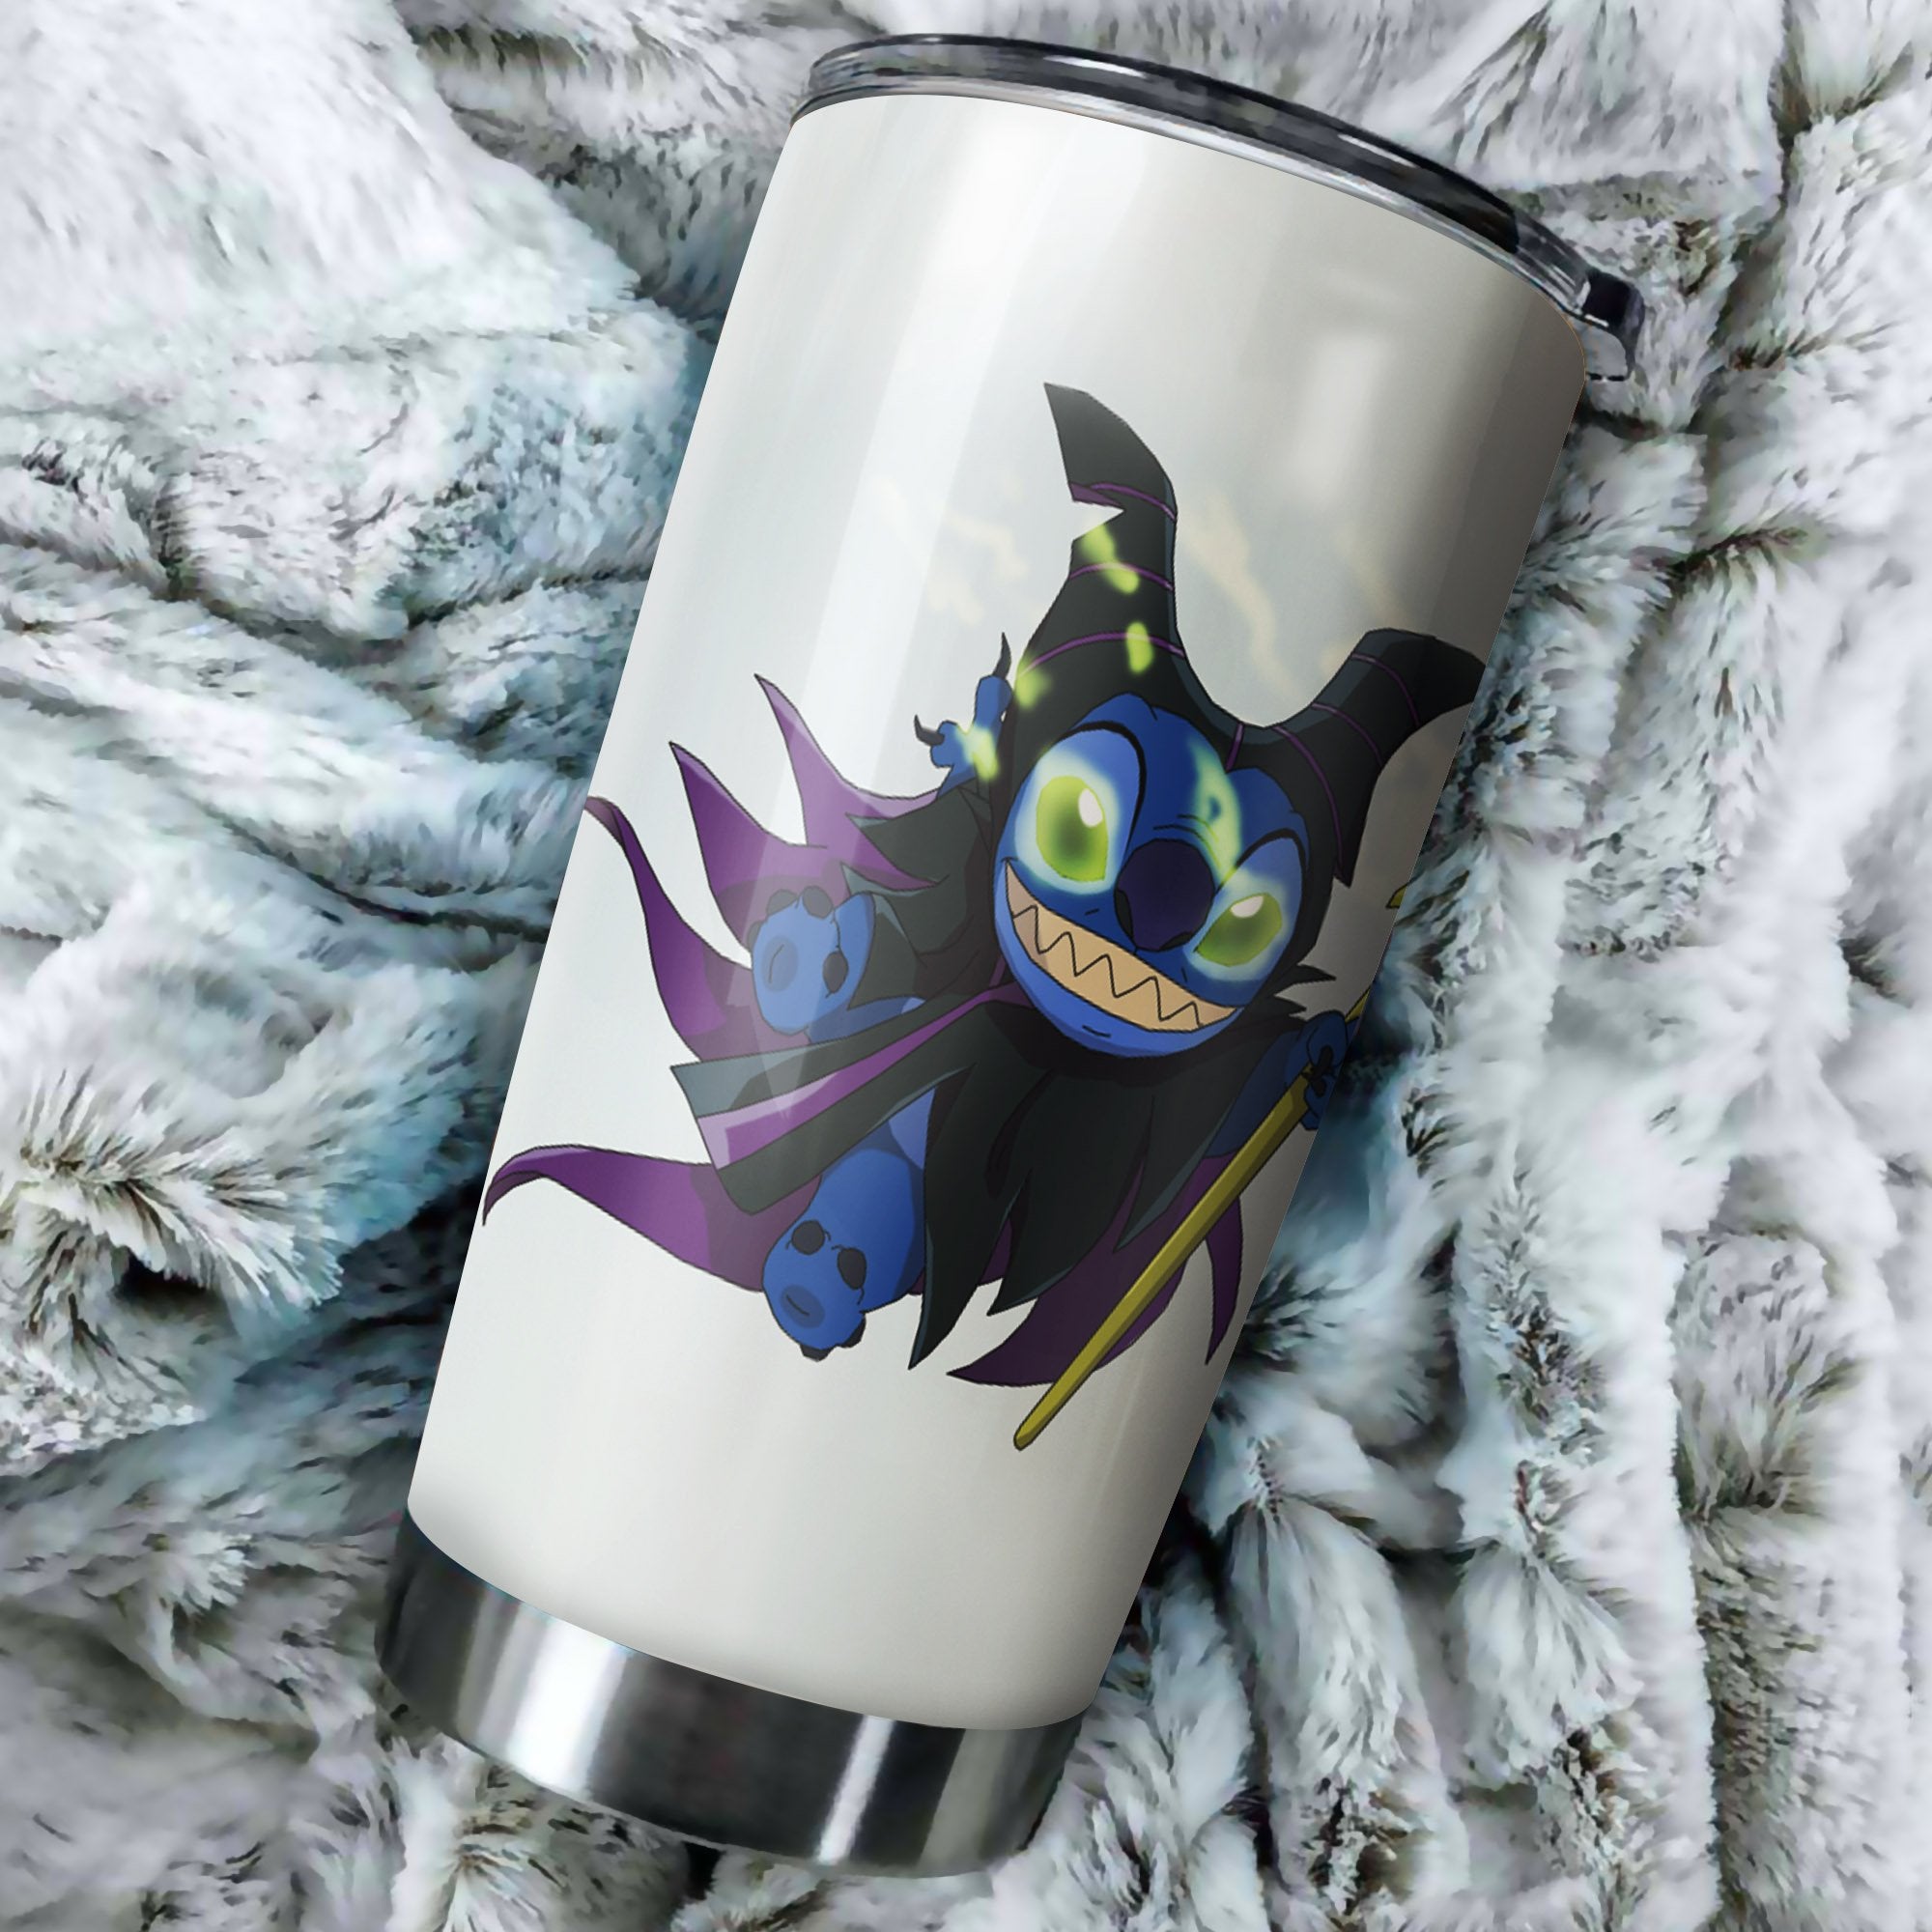 Stitch Maleficent Tumbler Perfect Birthday Best Gift Stainless Traveling Mugs 2021